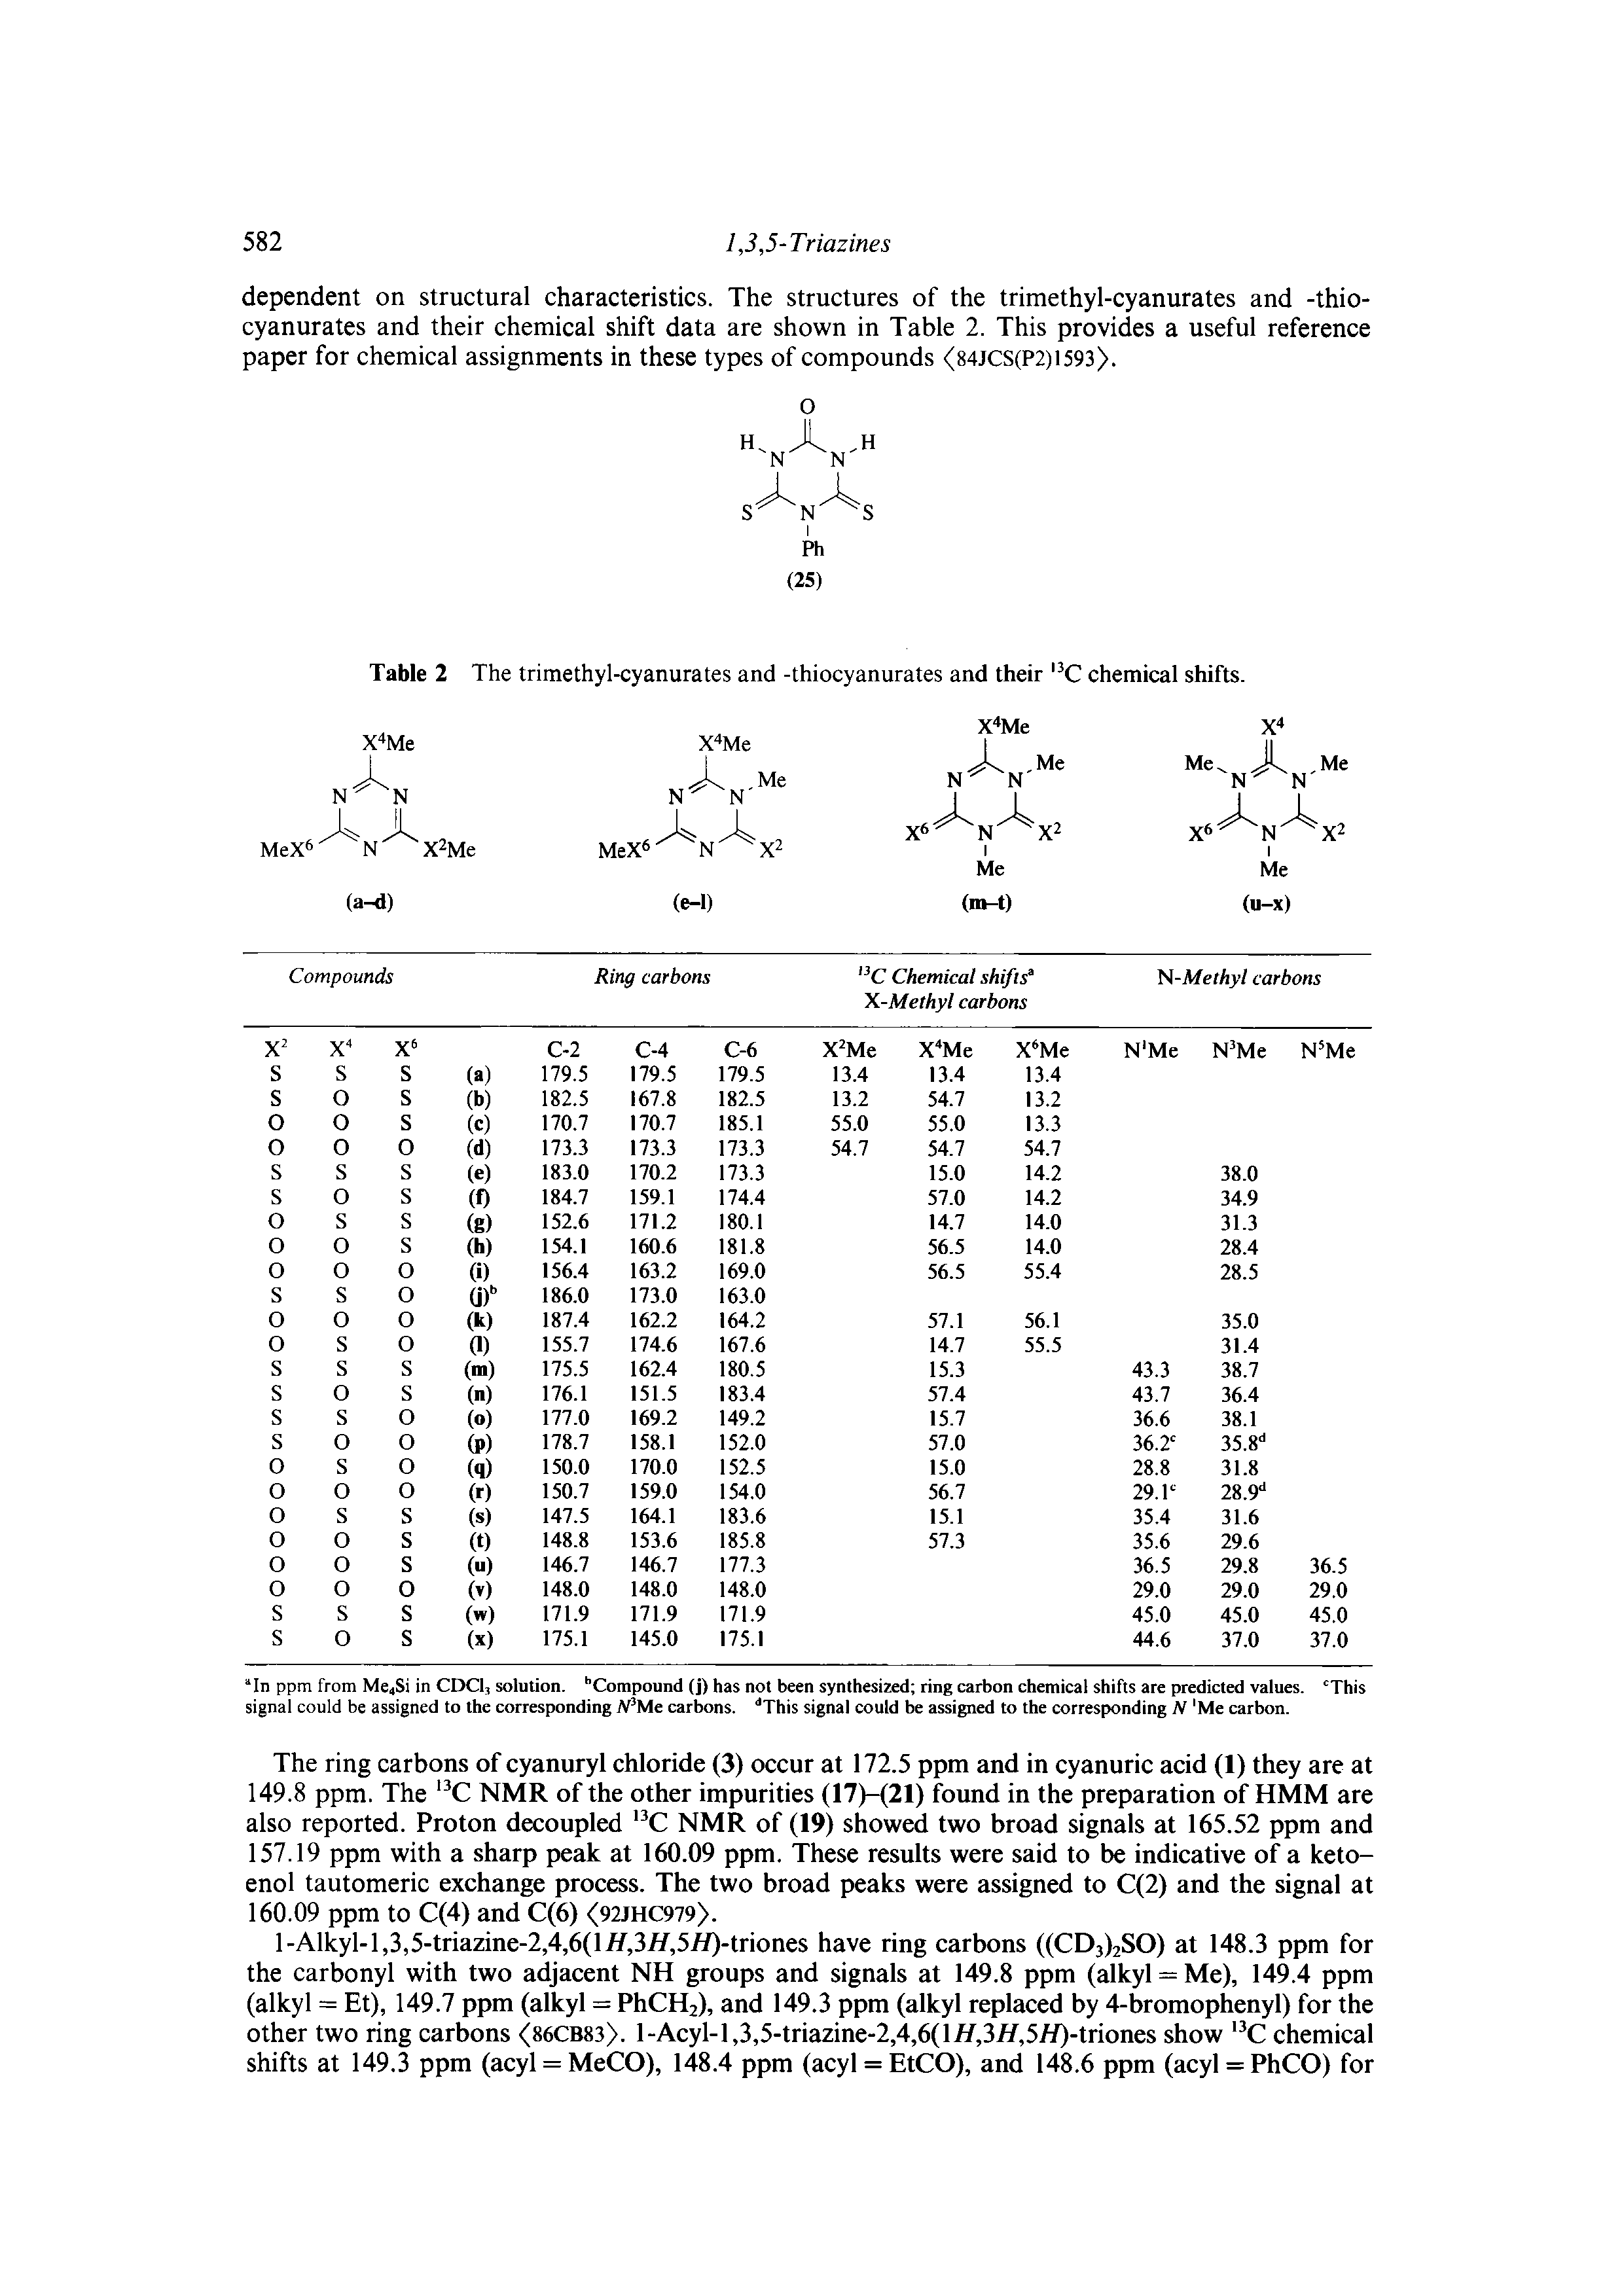 Table 2 The trimethyl-cyanurates and -thiocyanurates and their C chemical shifts.